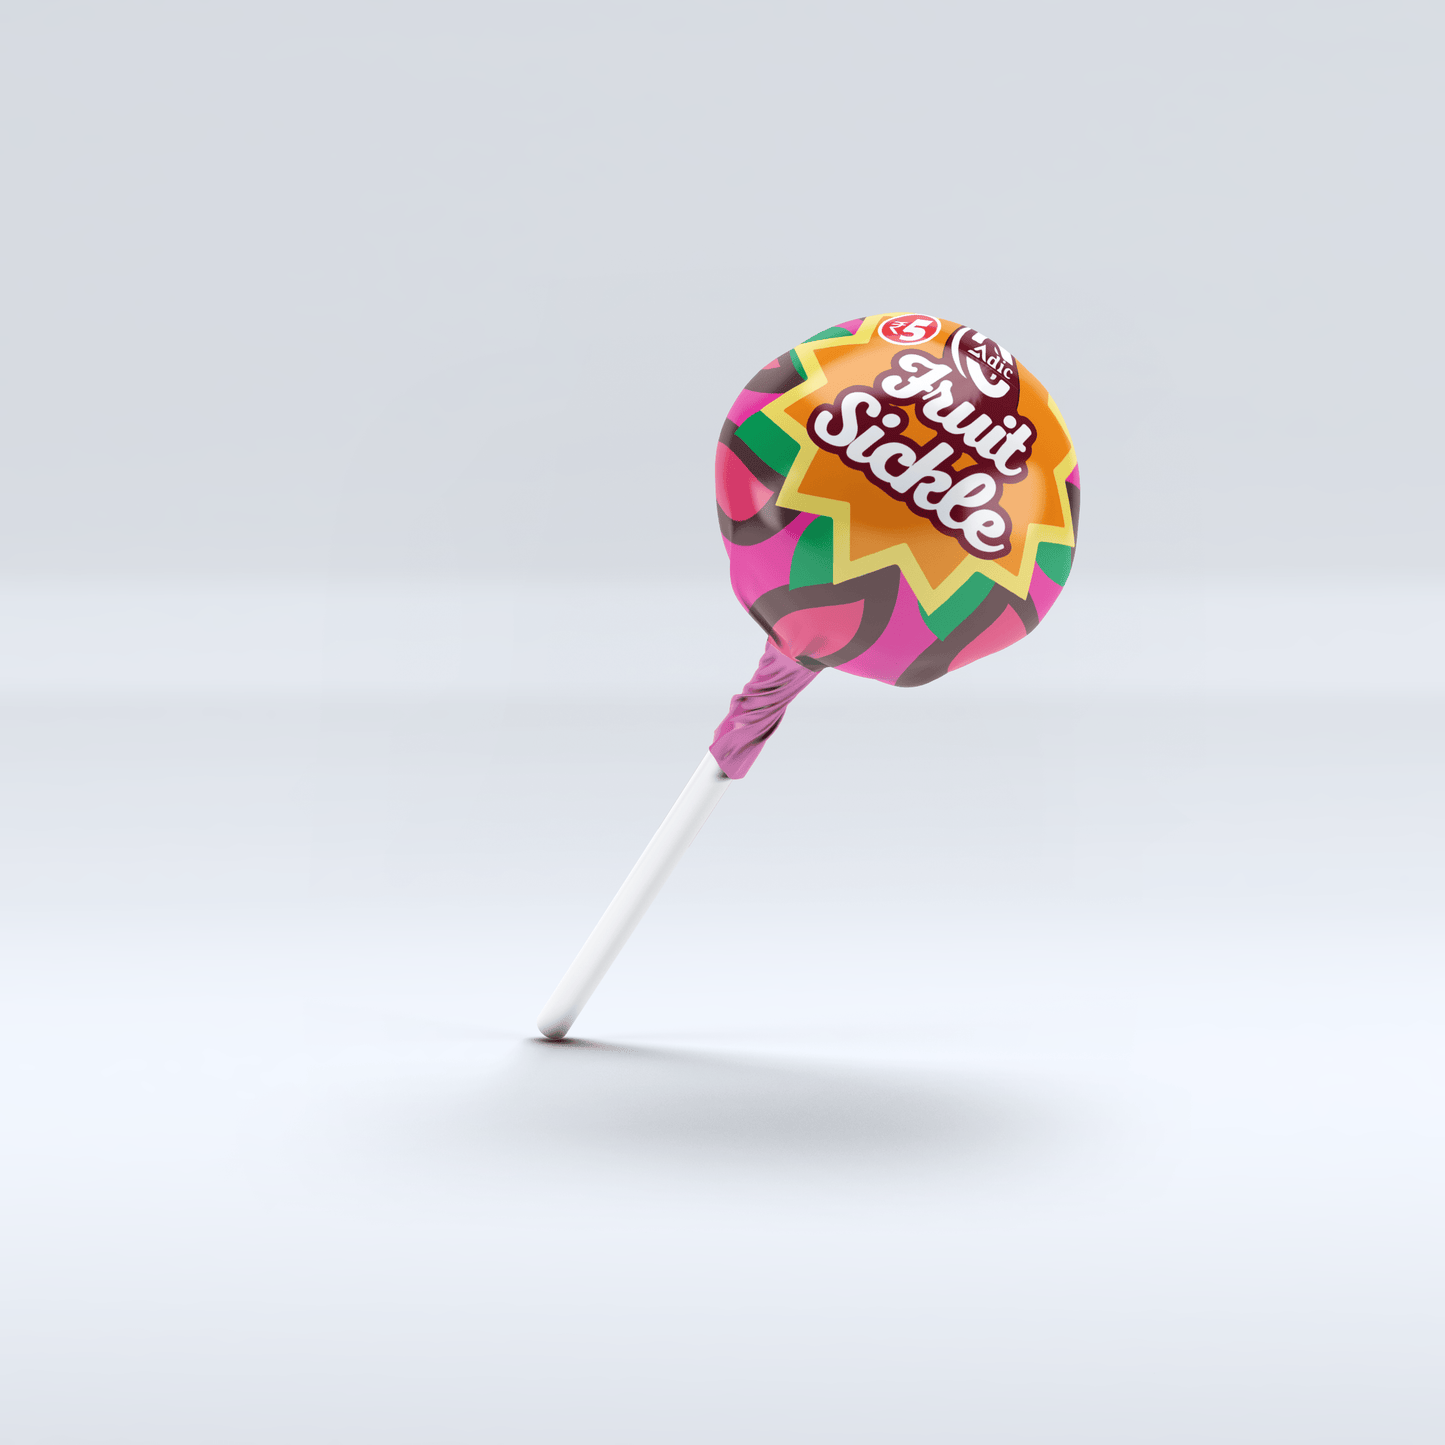 Adic’s Fruitsickle - Fruitilicious lollipops filled with tasty and fun treats